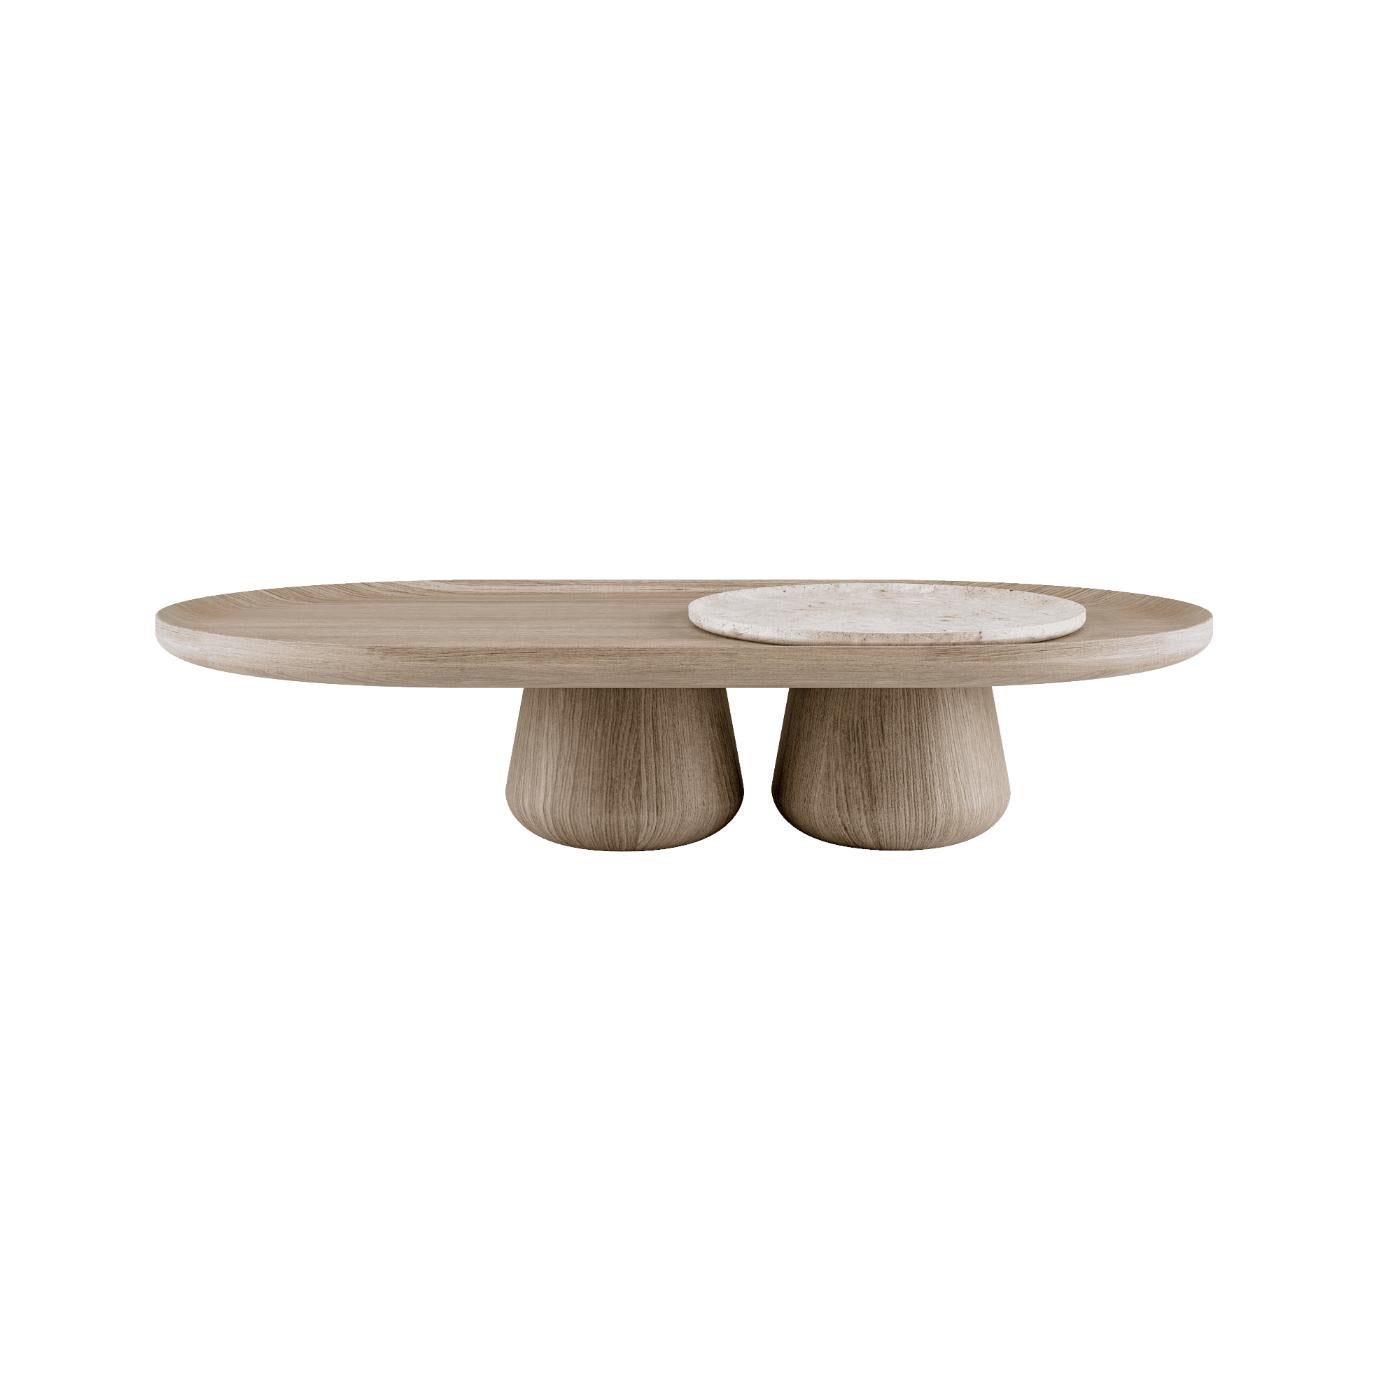 Large Bold Coffee Table by Mohdern
Dimensions: W 140 x D 80 x H 30 cm (Marble Tray Included ⌀ 52 cm)
Materials: Solid Ash


Bold is a refined collection of coffee tables designed and produced by the Mohdern brand. Available in three sizes. Made of